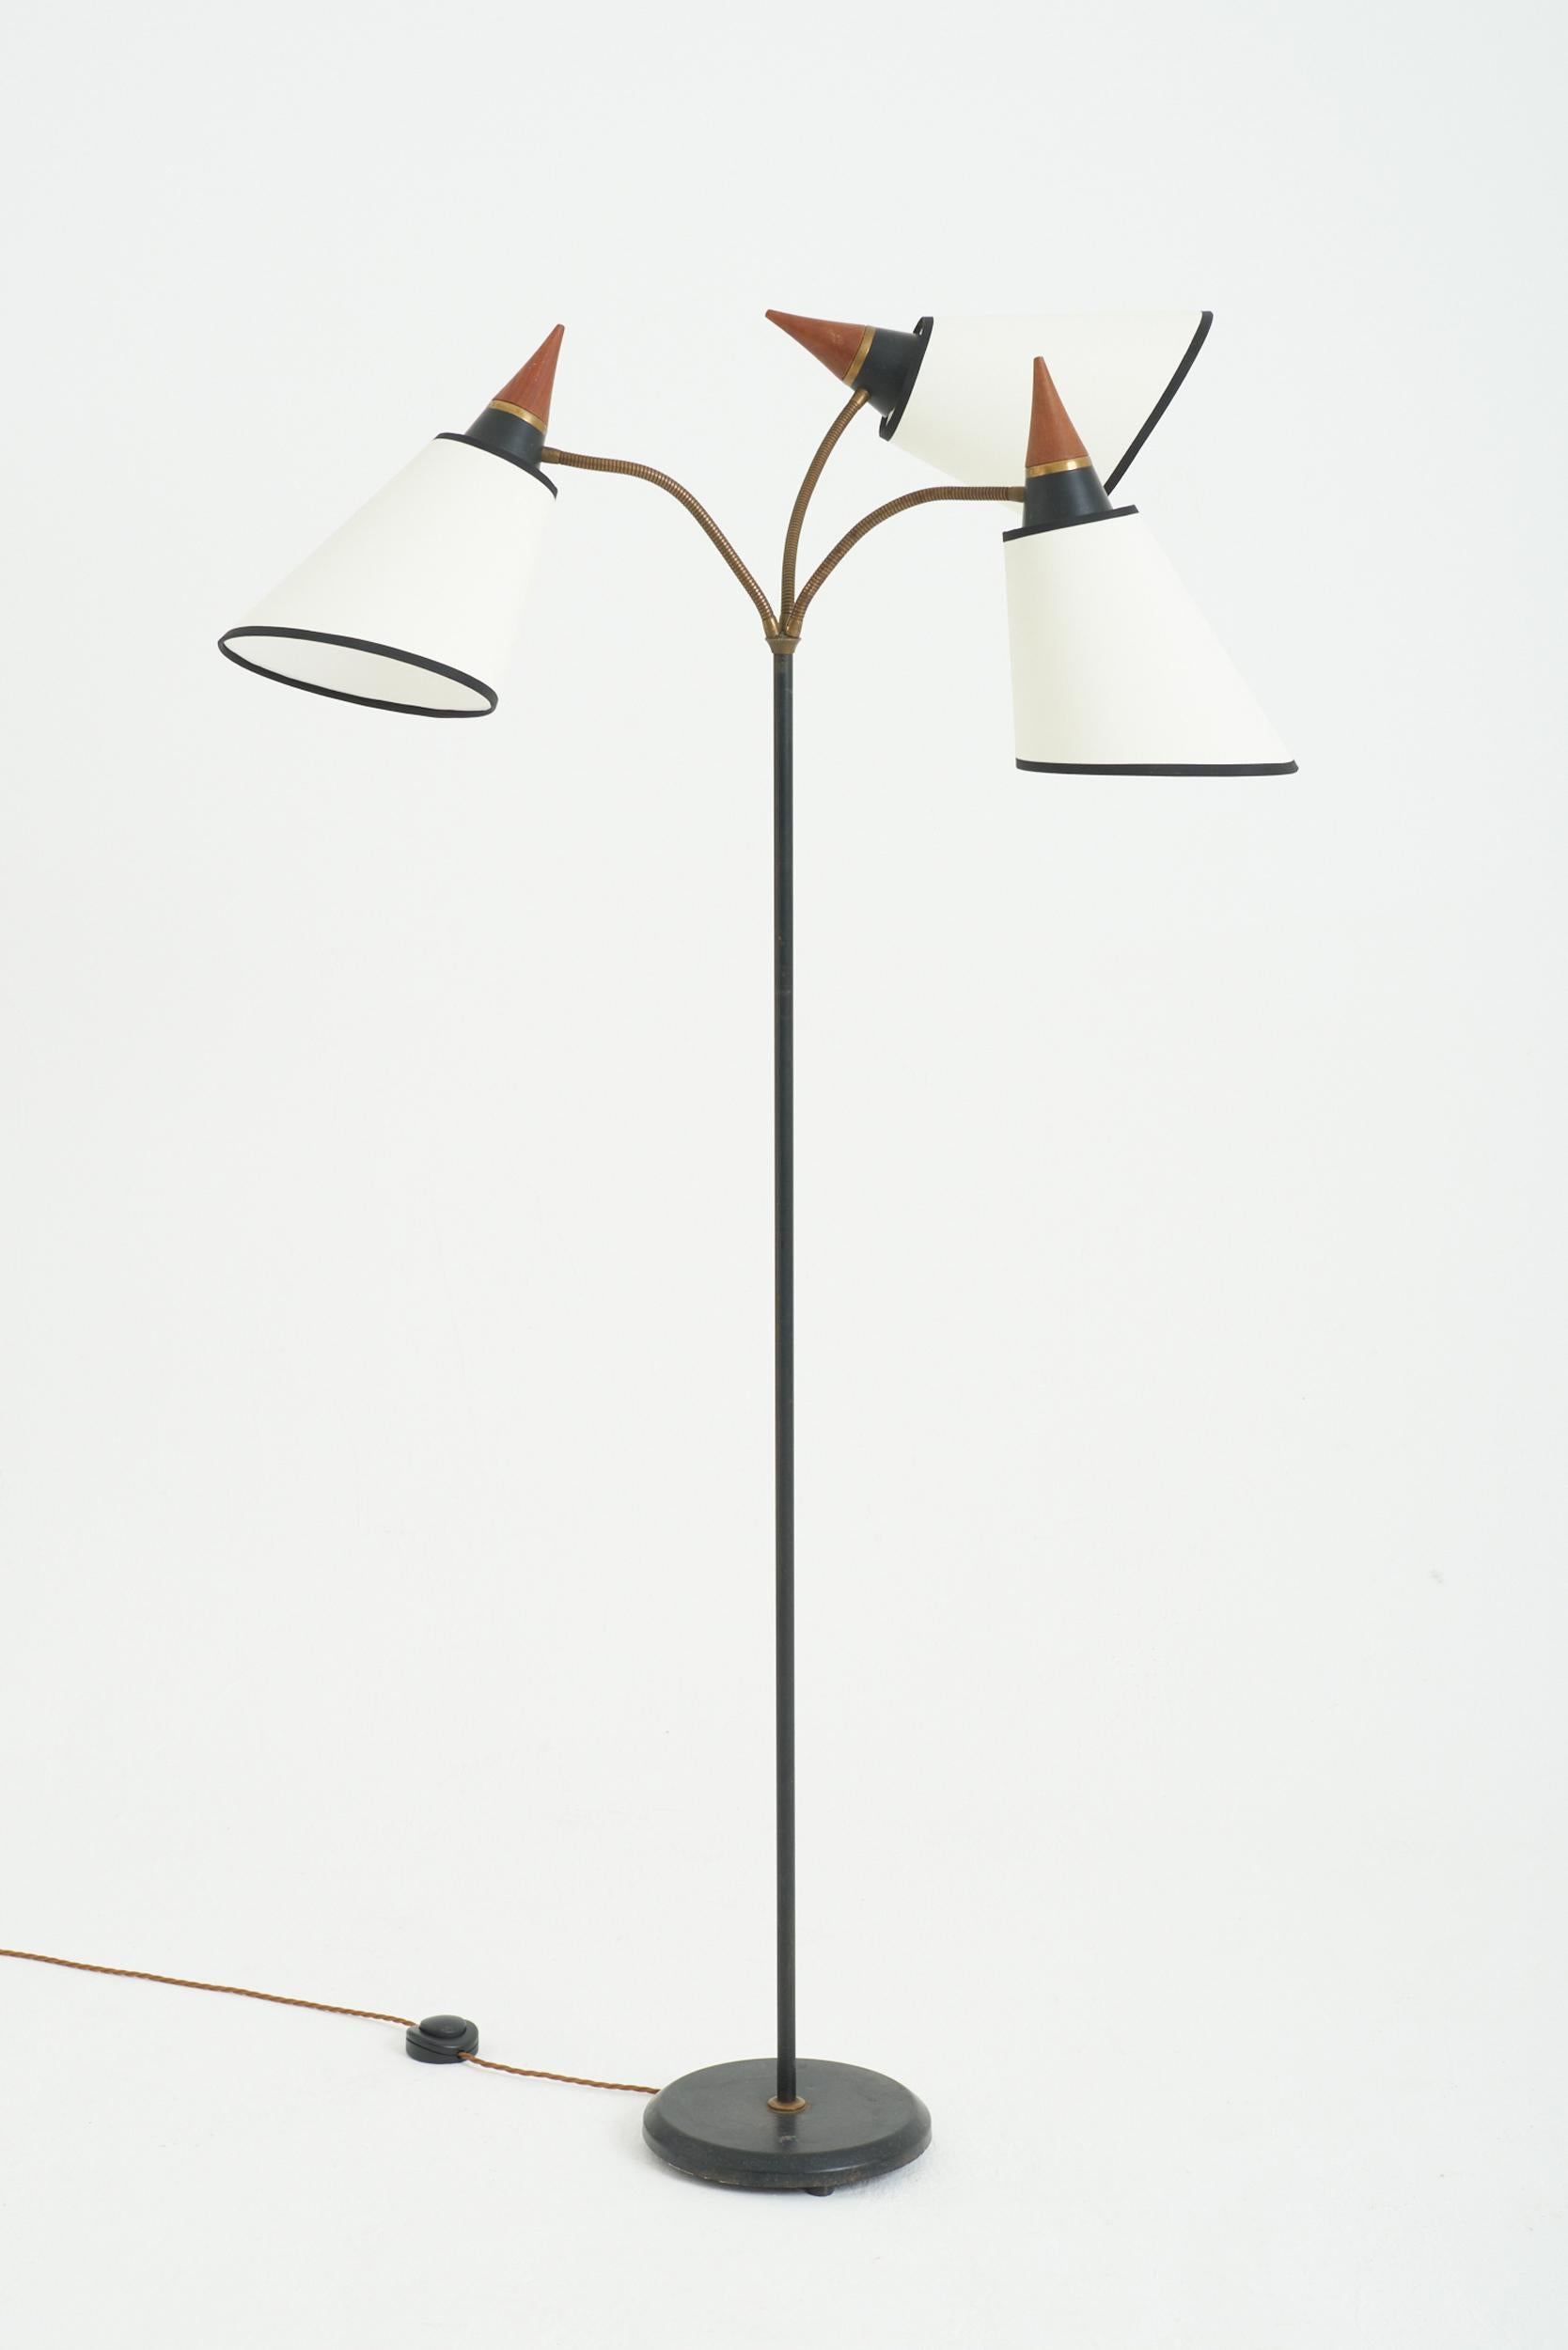 A black, brass and teak three-armed reading floor lamp.
Sweden, mid 20th Century
179 cm high by 90 cm wide by 90 cm depth